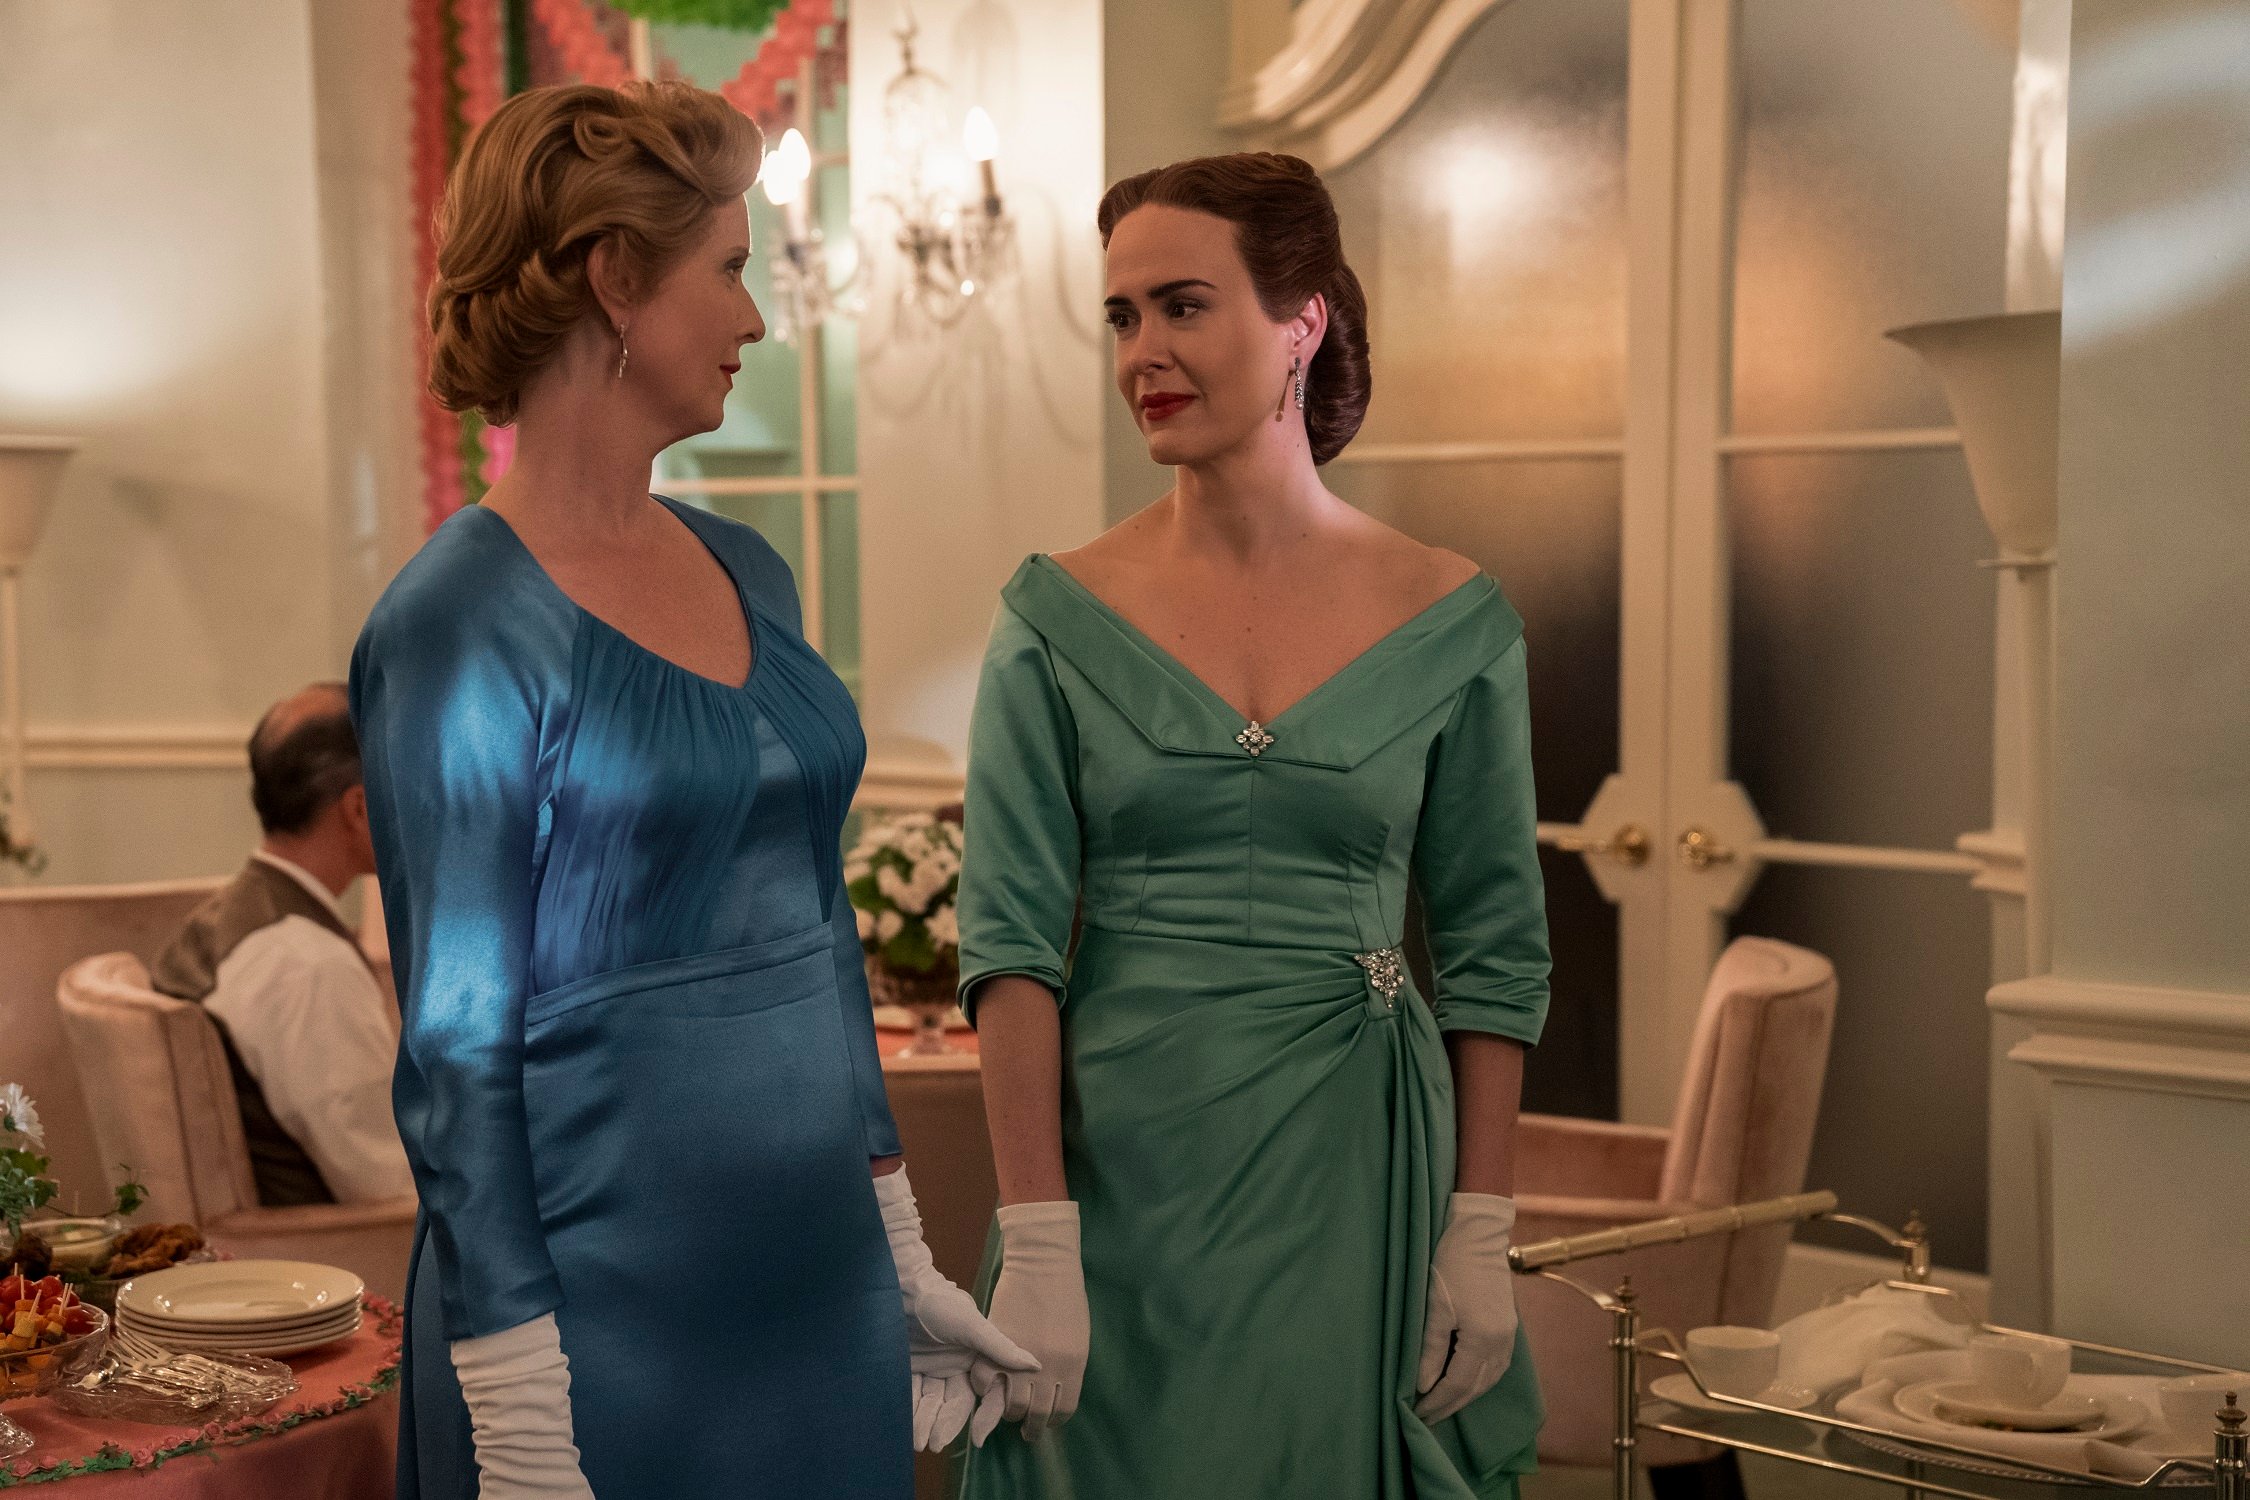 Cynthia Nixon and Sarah Paulson act in a scene for 'Ratched' season 1